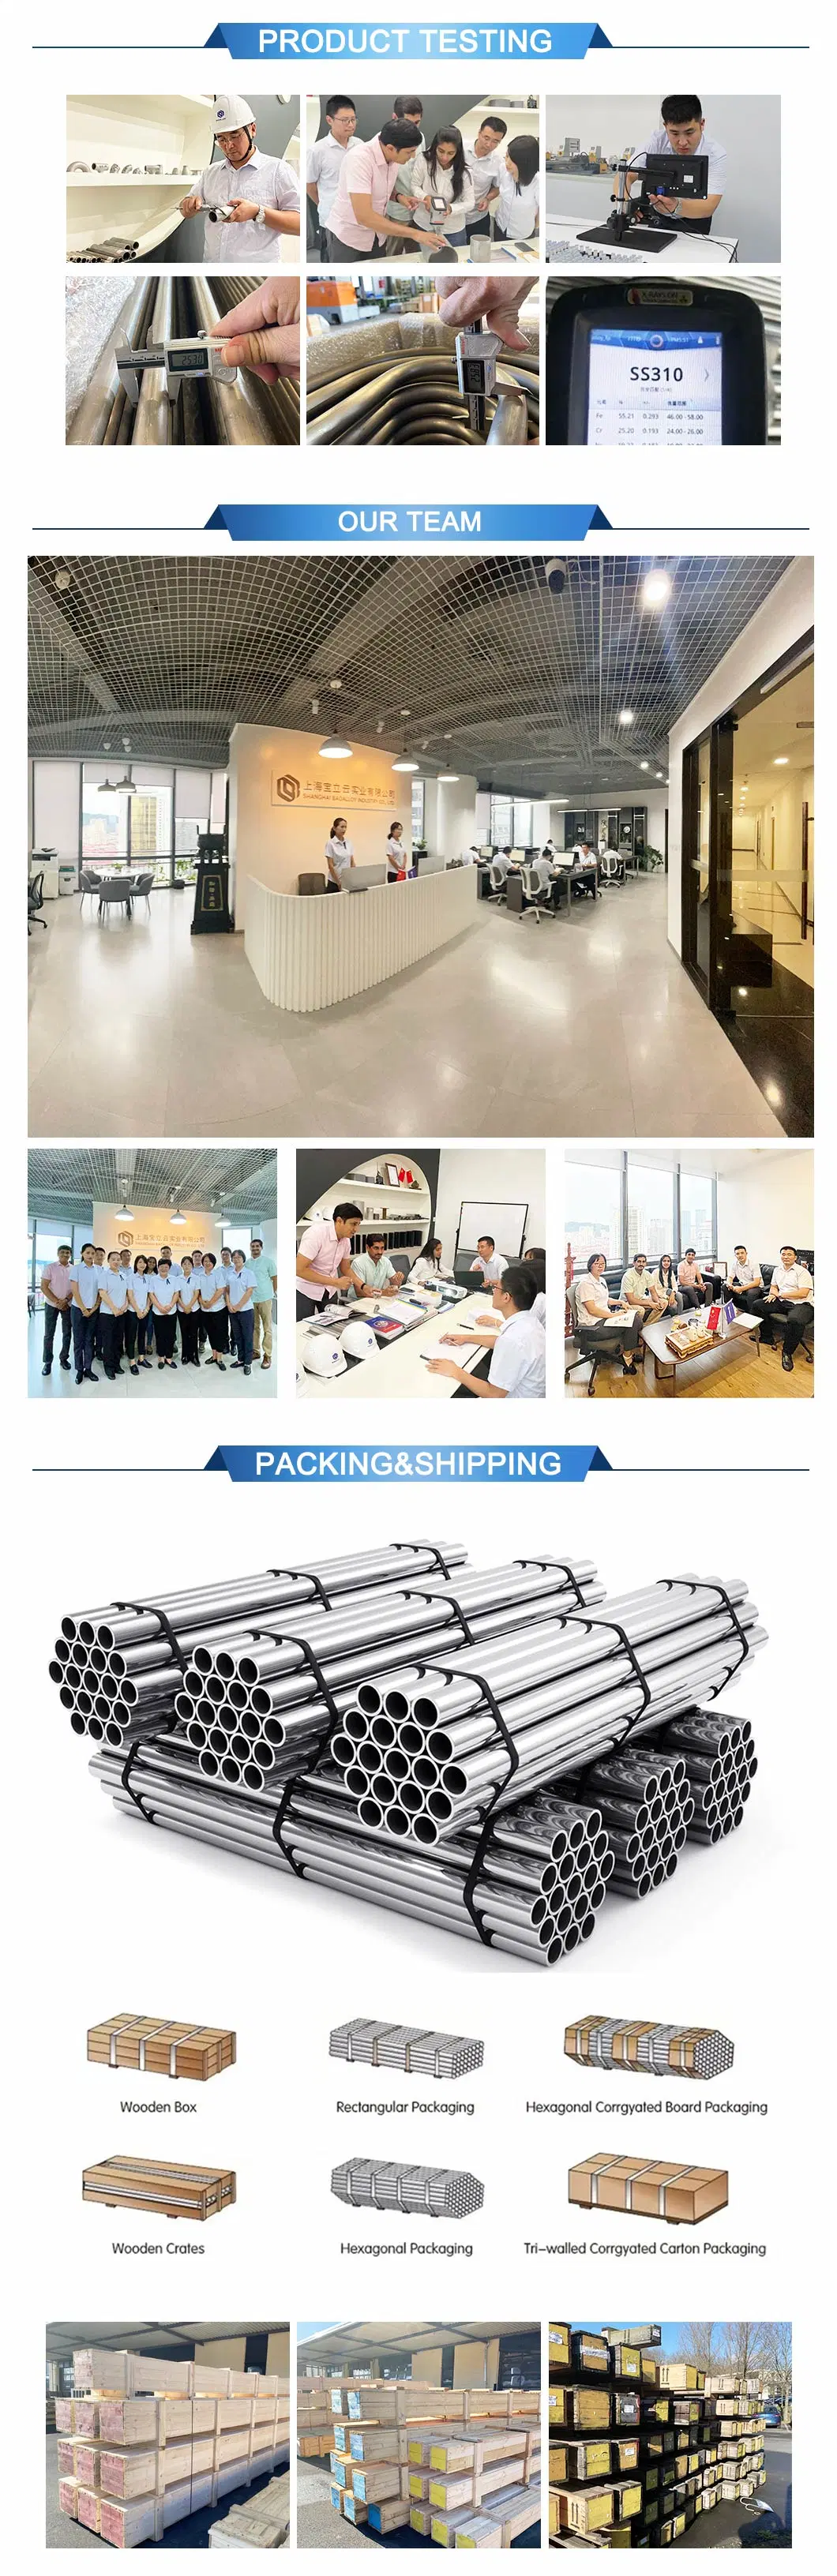 Nickel Alloy Round Square Tube Pipe Inconel 600 601 625 Tube Pipe Seamless Tube Pipe